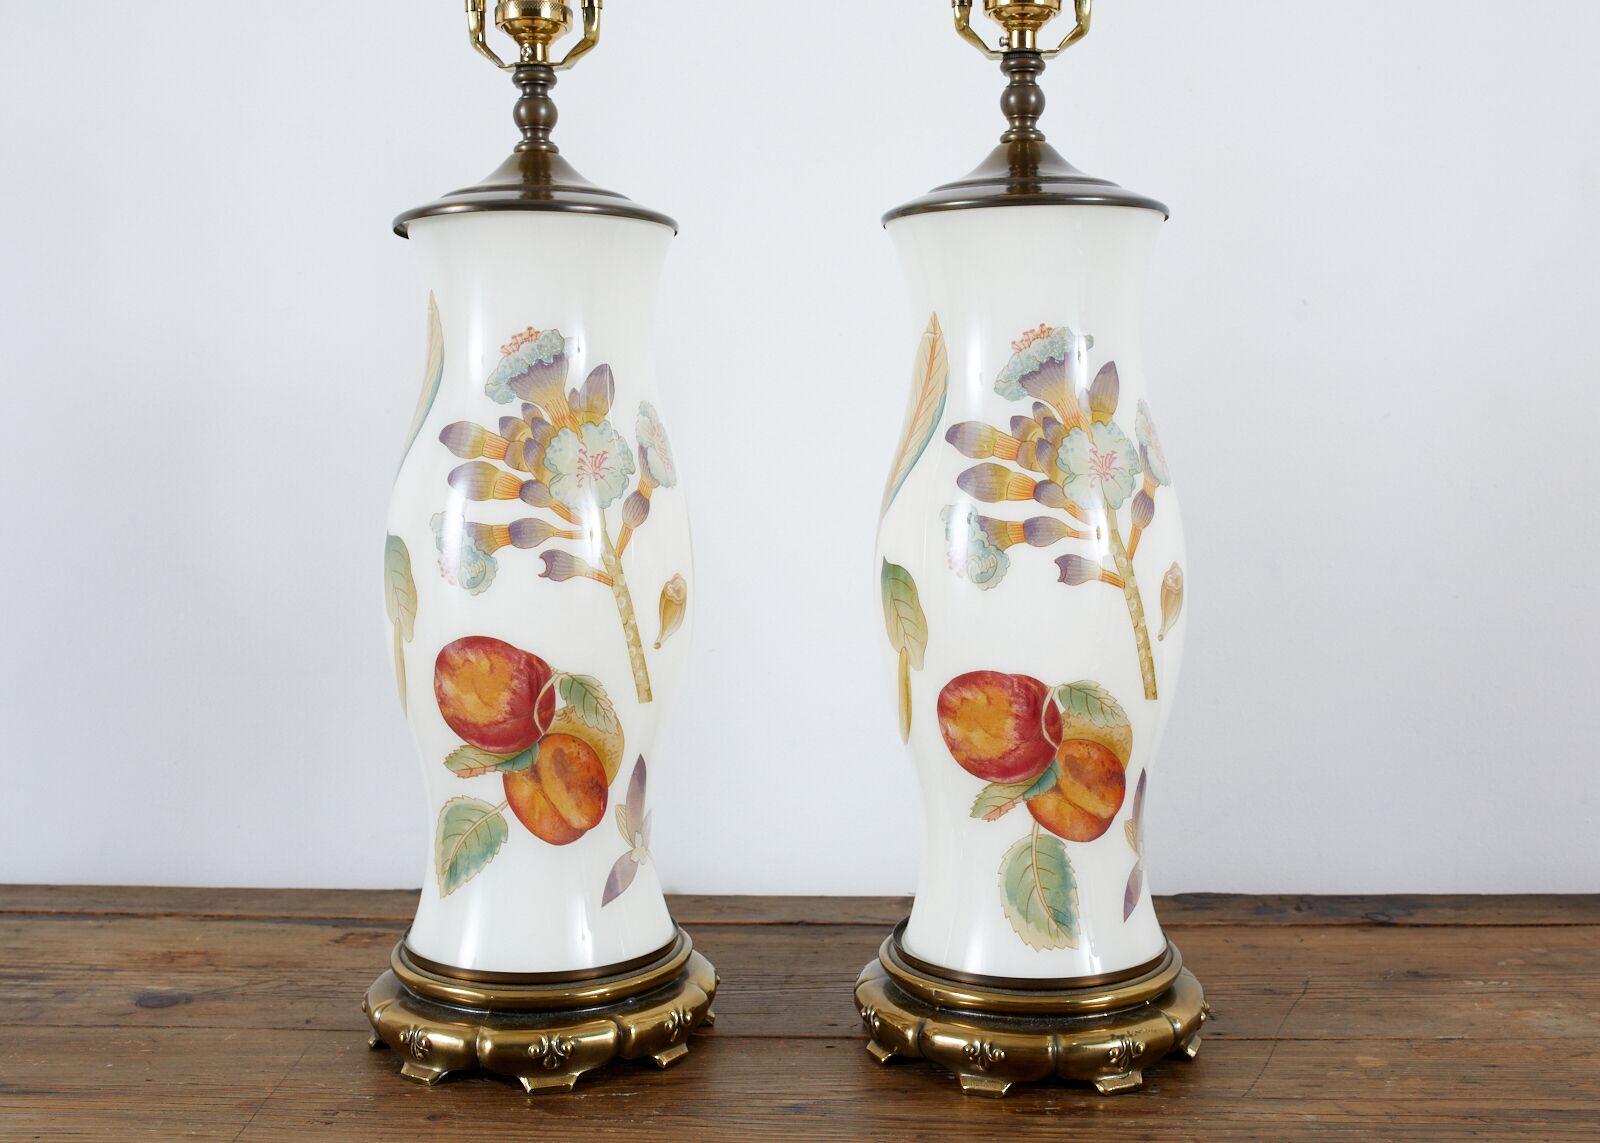 Stunning pair of English decalcomania vase table lamps decorated in the Hollywood Regency taste. Featuring baluster form glass vases with images of peaches, pineapples, palm leaves, and flowers. The vases are mounted to Asian Style brass bases in